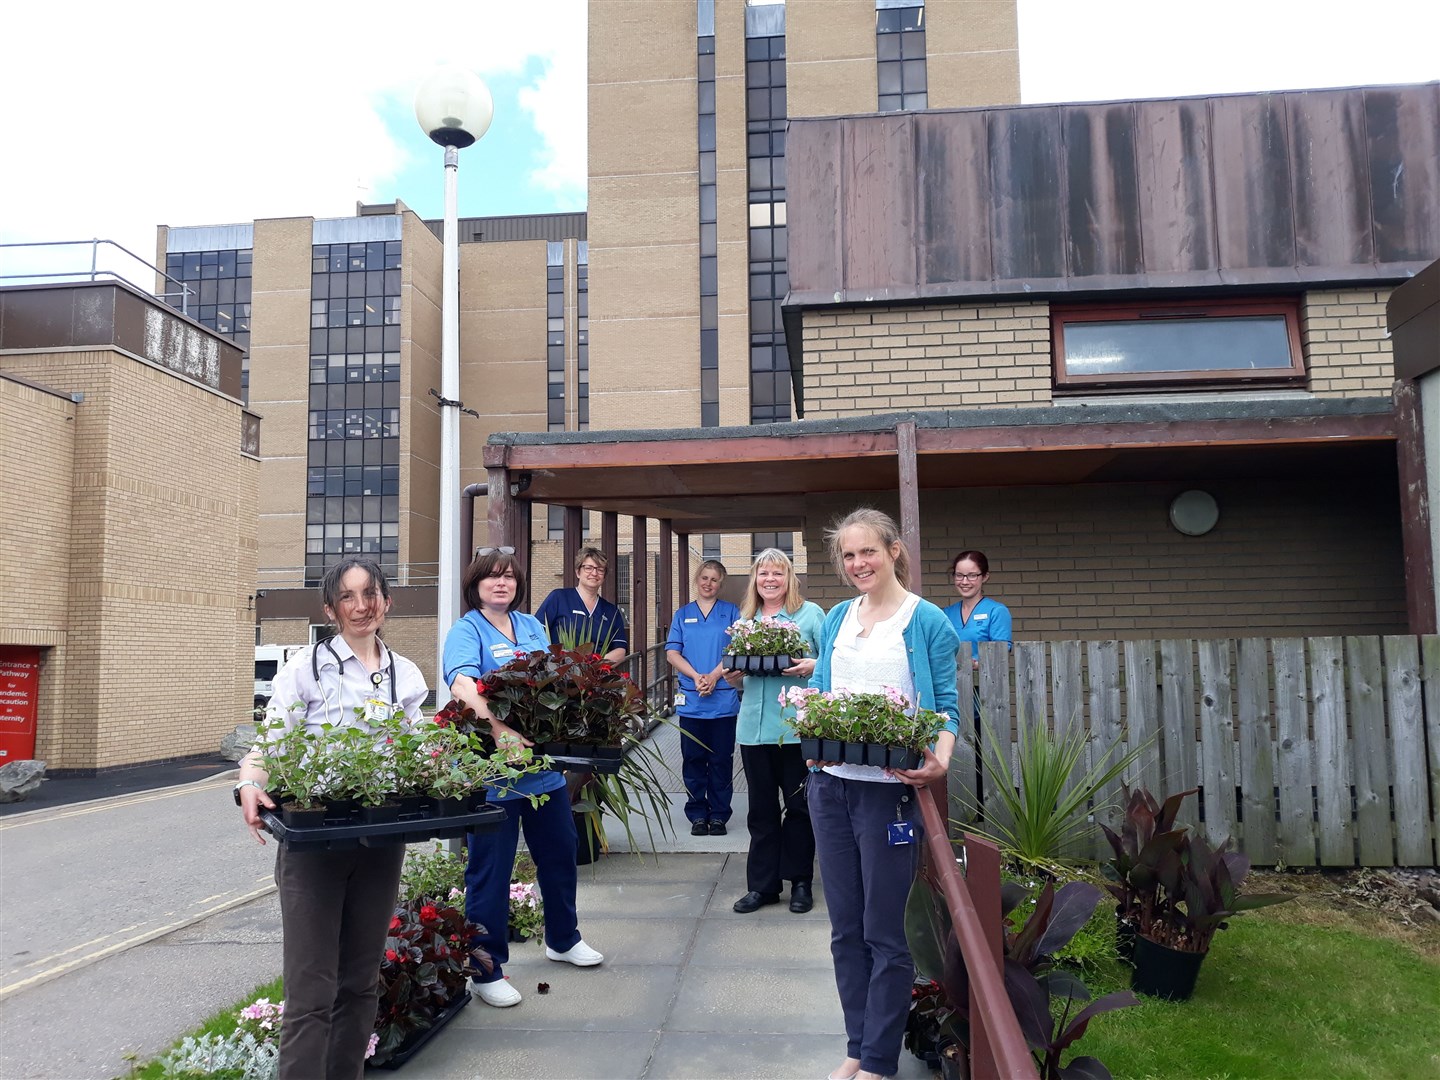 The delivery of plants from the garden provided a boost for renal unit staff.